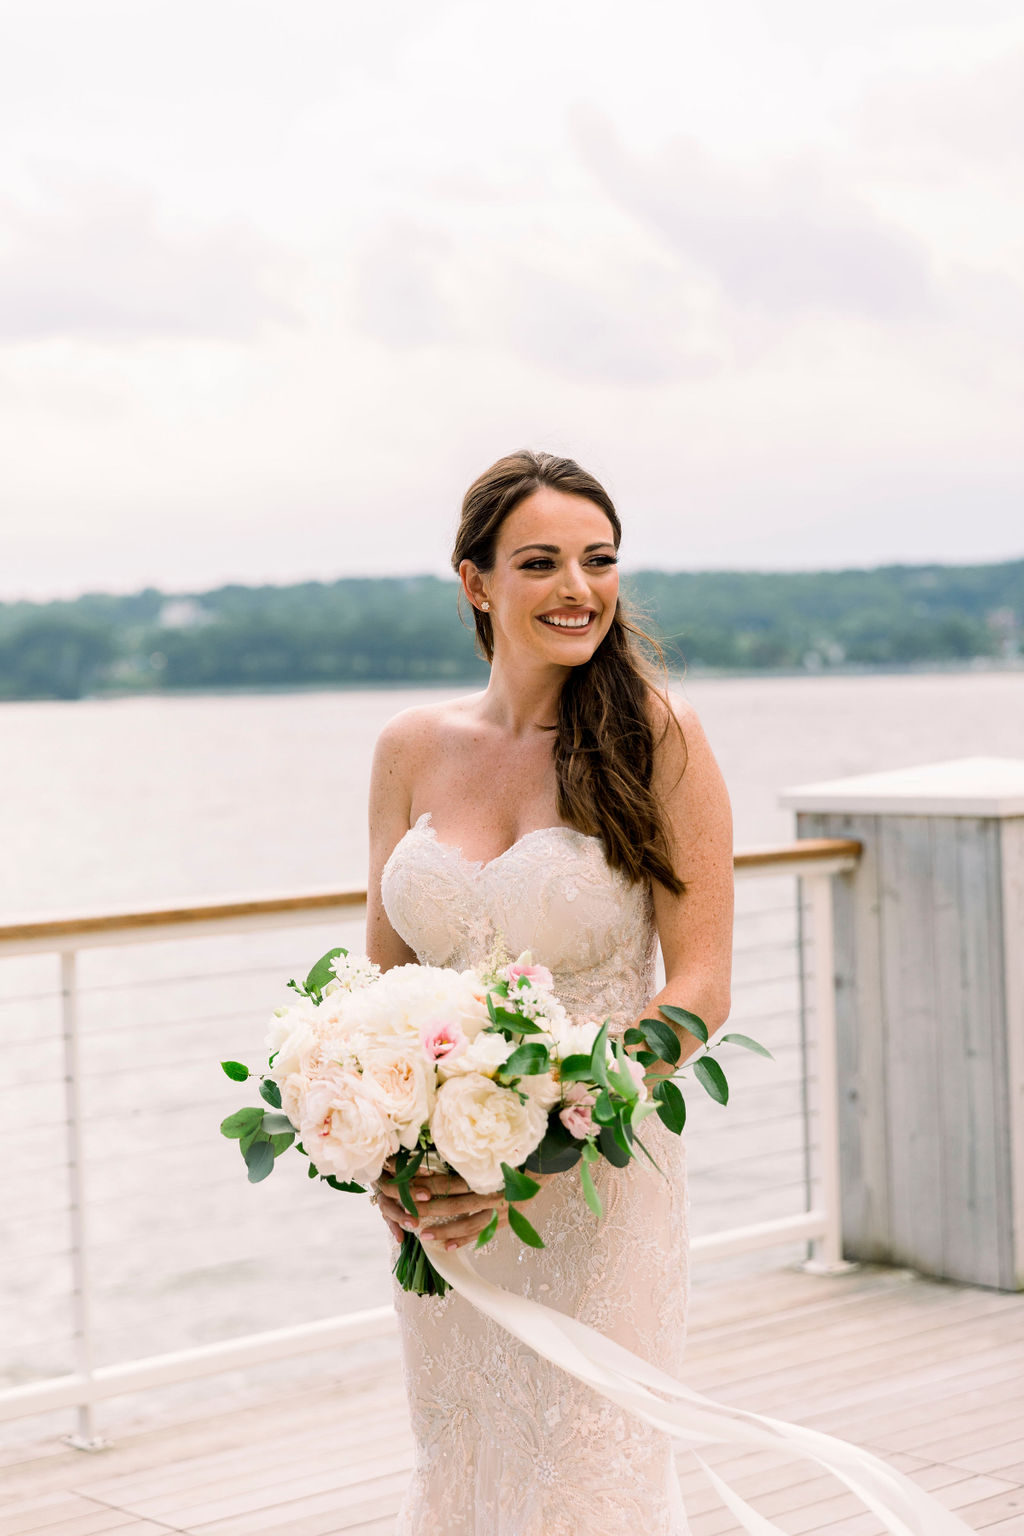 Gloucester Wedding by the Sea | Florals by Les Fleurs Andover